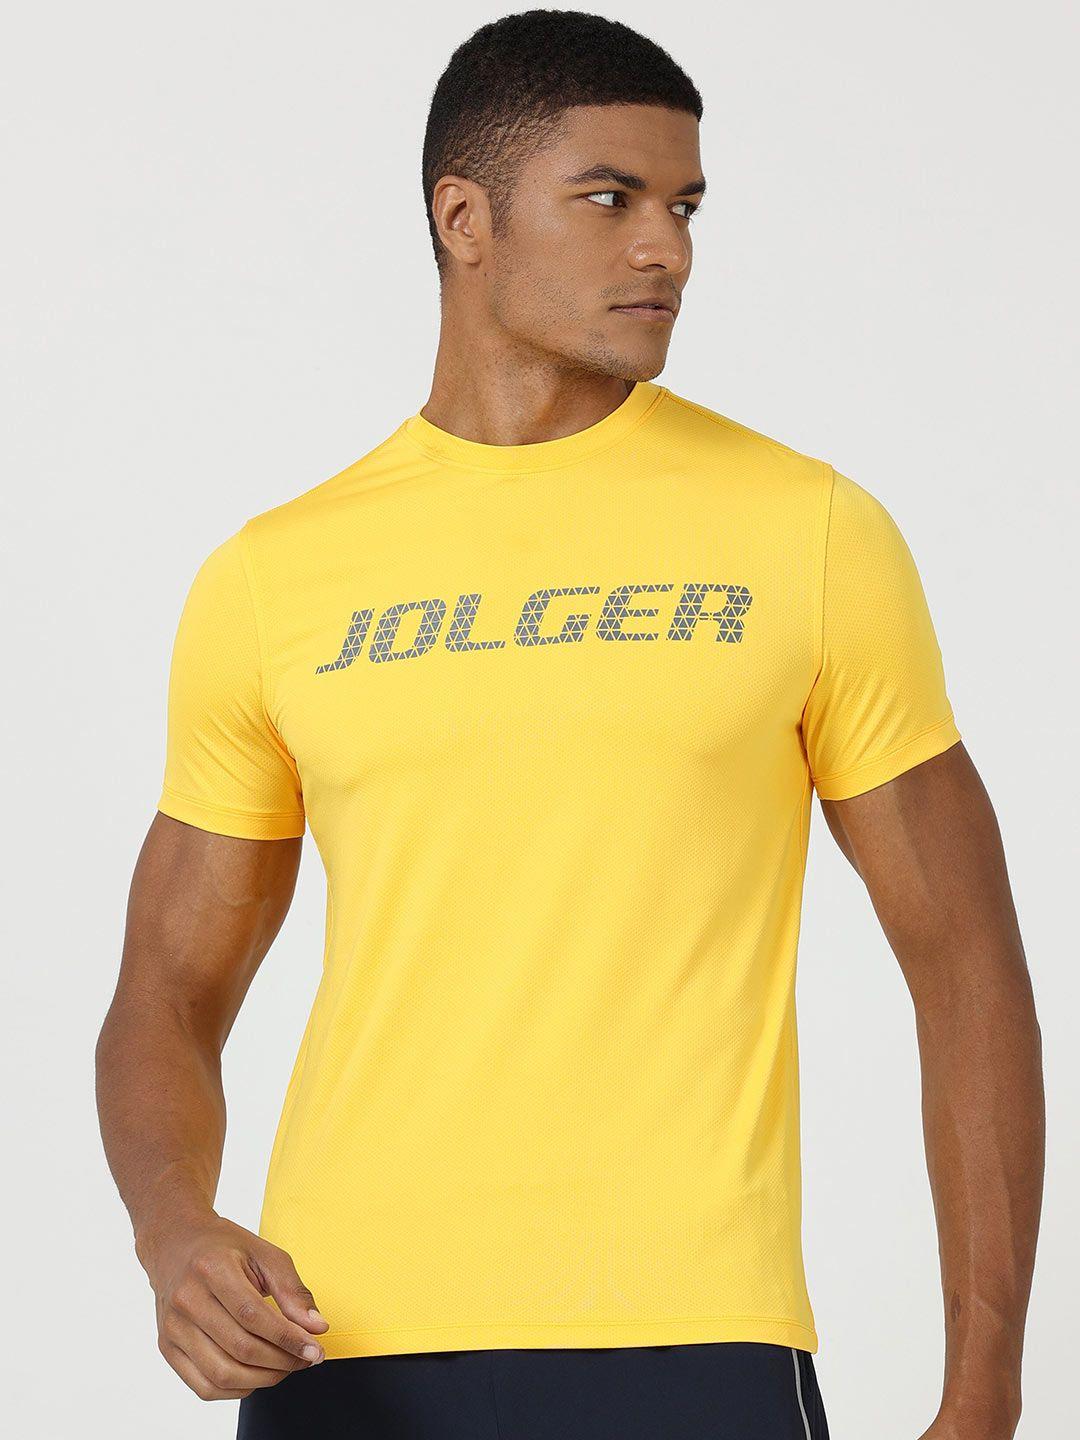 jolger slim fit thermoregulated rapid-dry quick wicking sports t-shirt